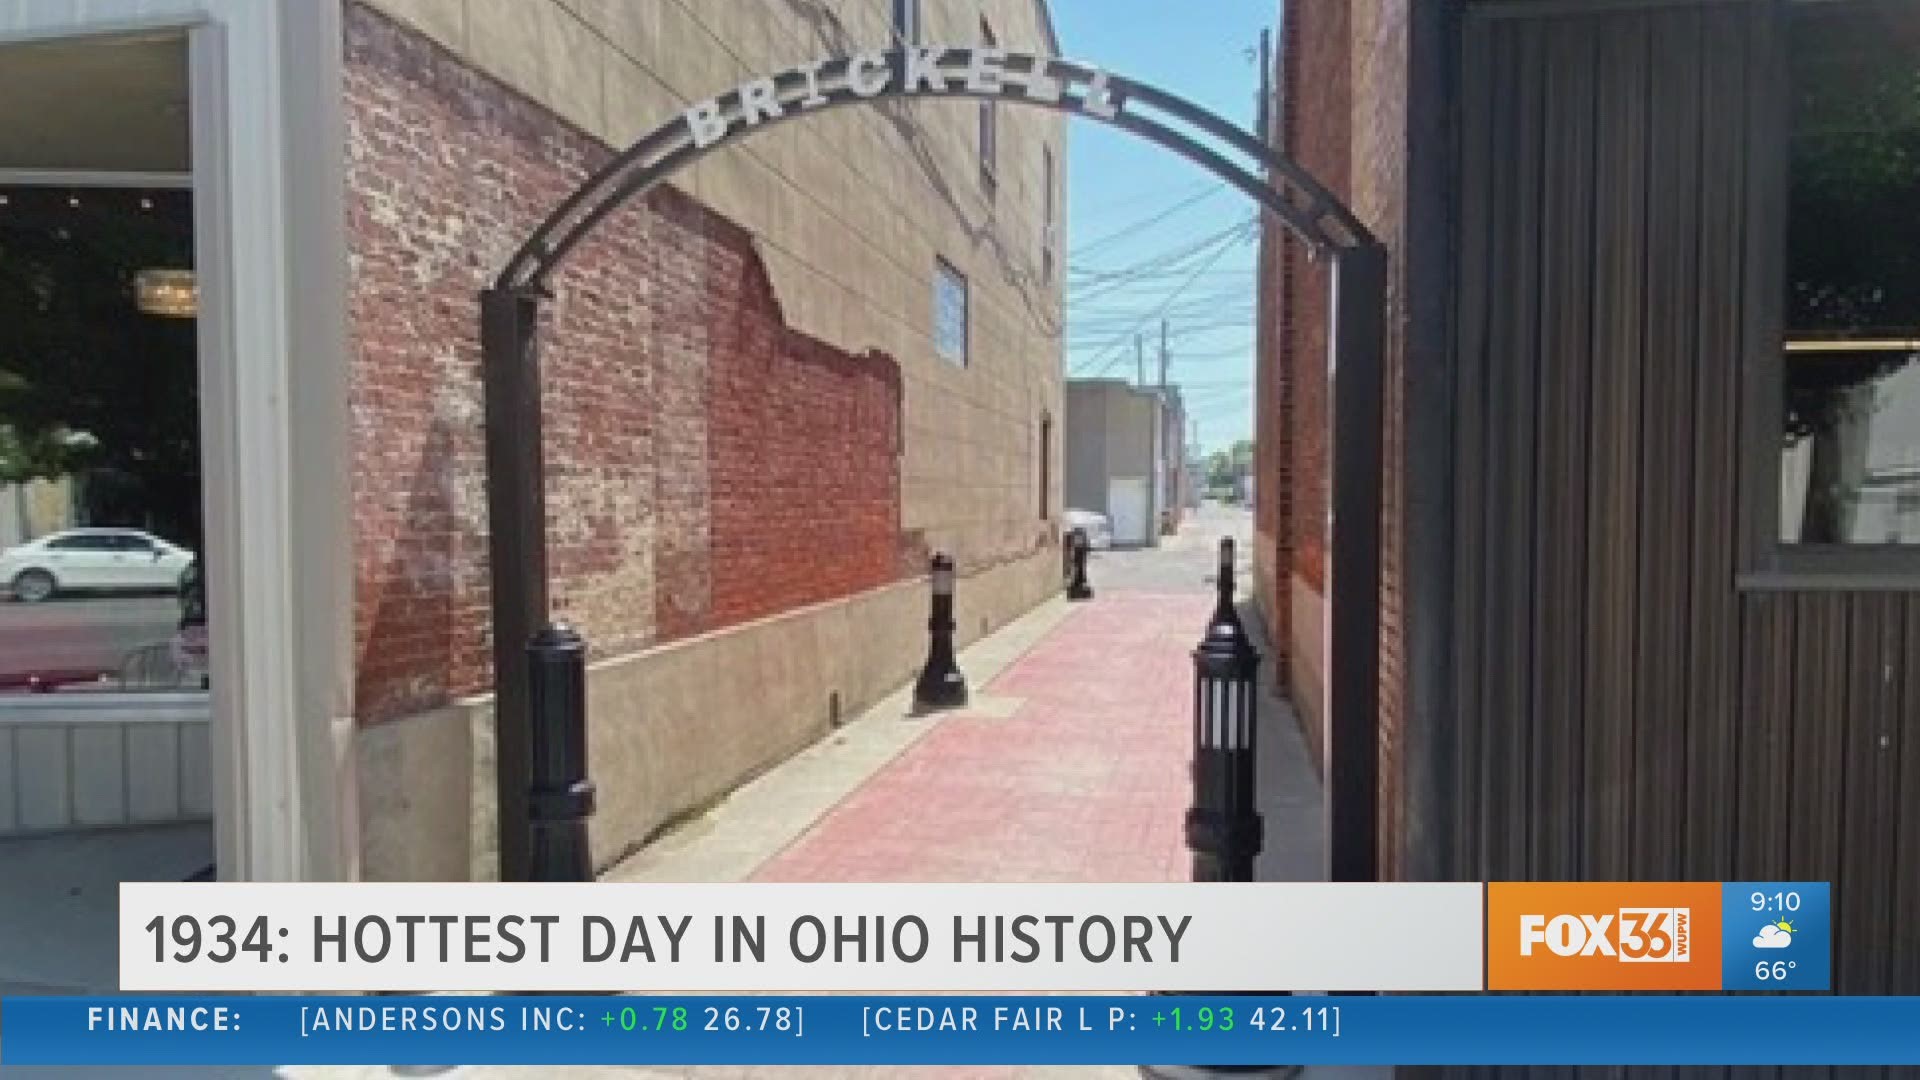 In 1934, today set the record as the hottest day in Ohio history!